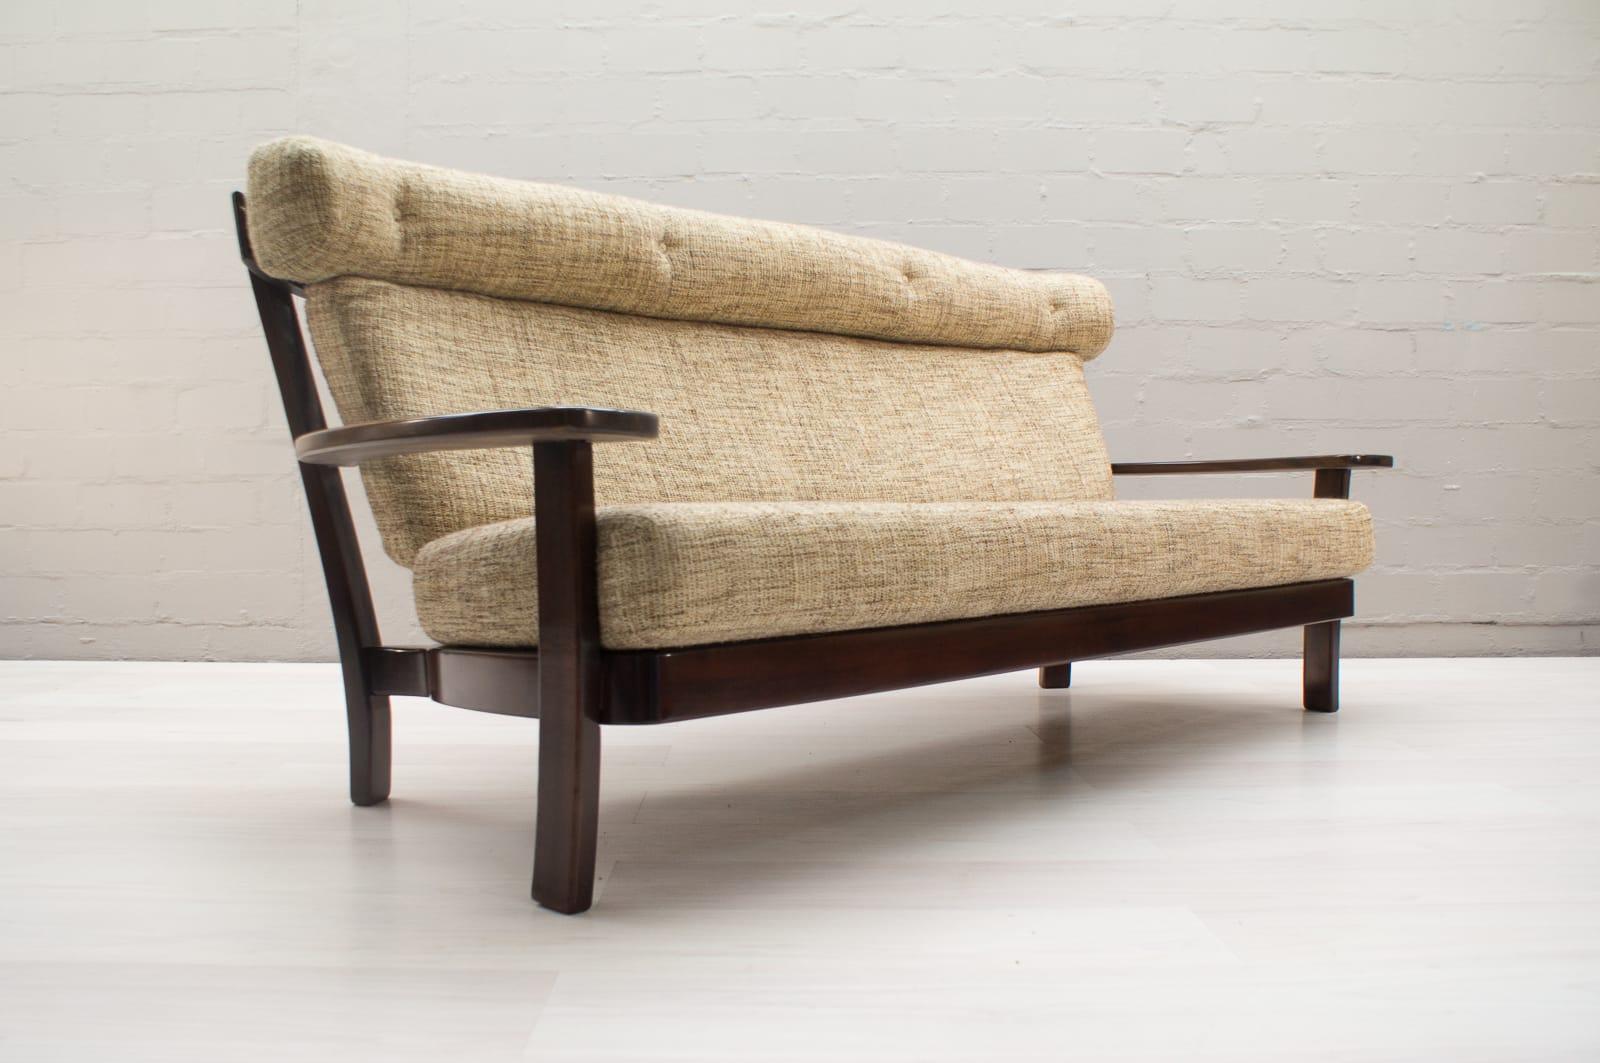 Sofa, rosewood, Brazilian design, European execution, 1960s. The sofa set is still in the original upholstery fabric. Altogether a very good condition.

This settee is executed in Brazilian rosewood and fabric and holds several well-constructed